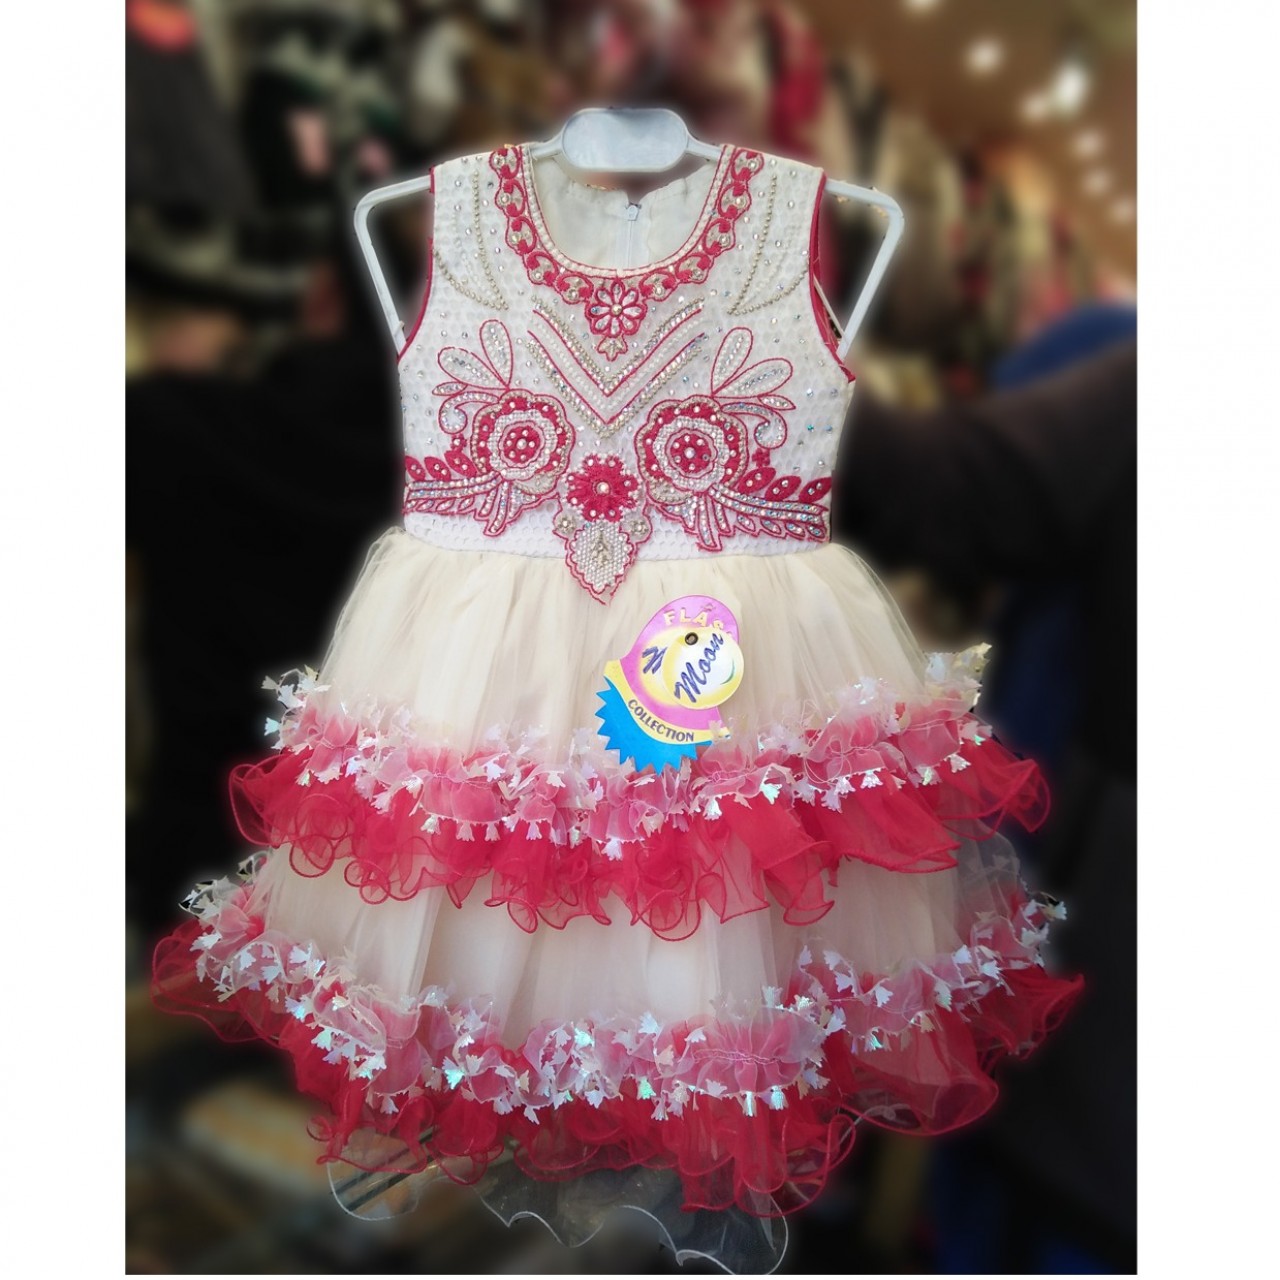 Gorgeous Wedding Party Frock For Cute Girls - 4 To 7 Years﻿